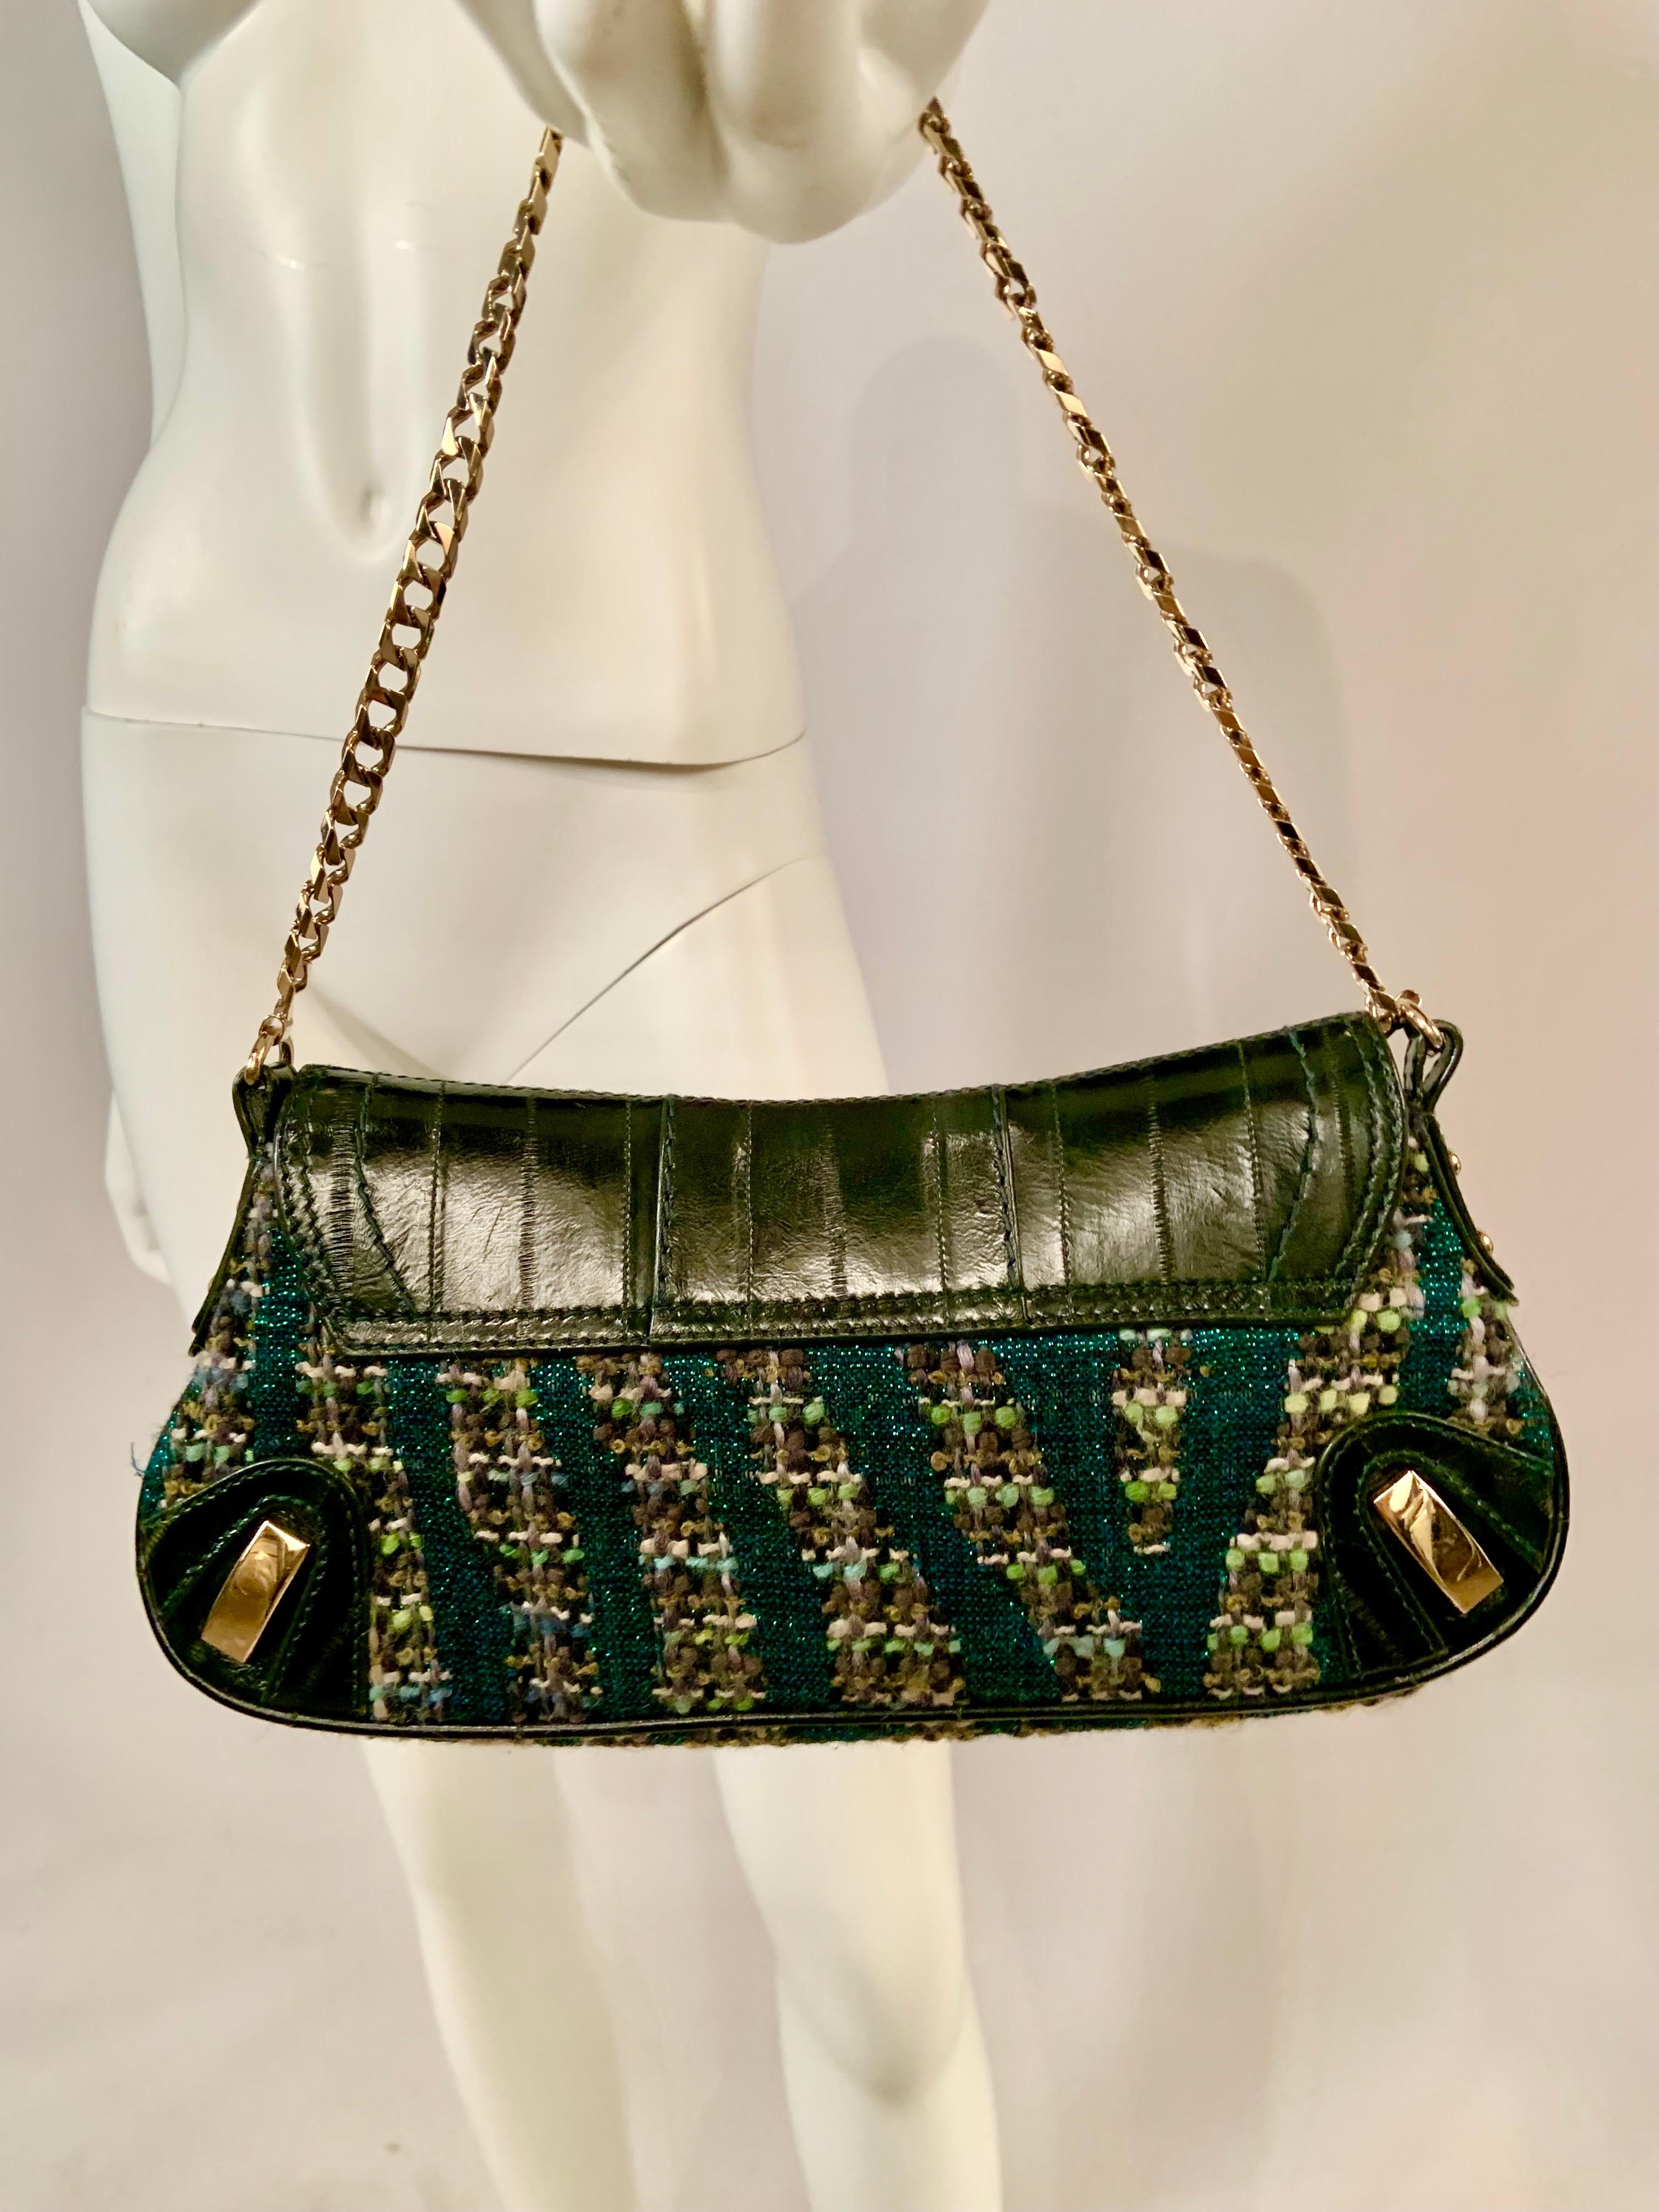 Dolce & Gabbana Green Leather and Tweed Bag with Oversized Jewel Clasp For Sale 2